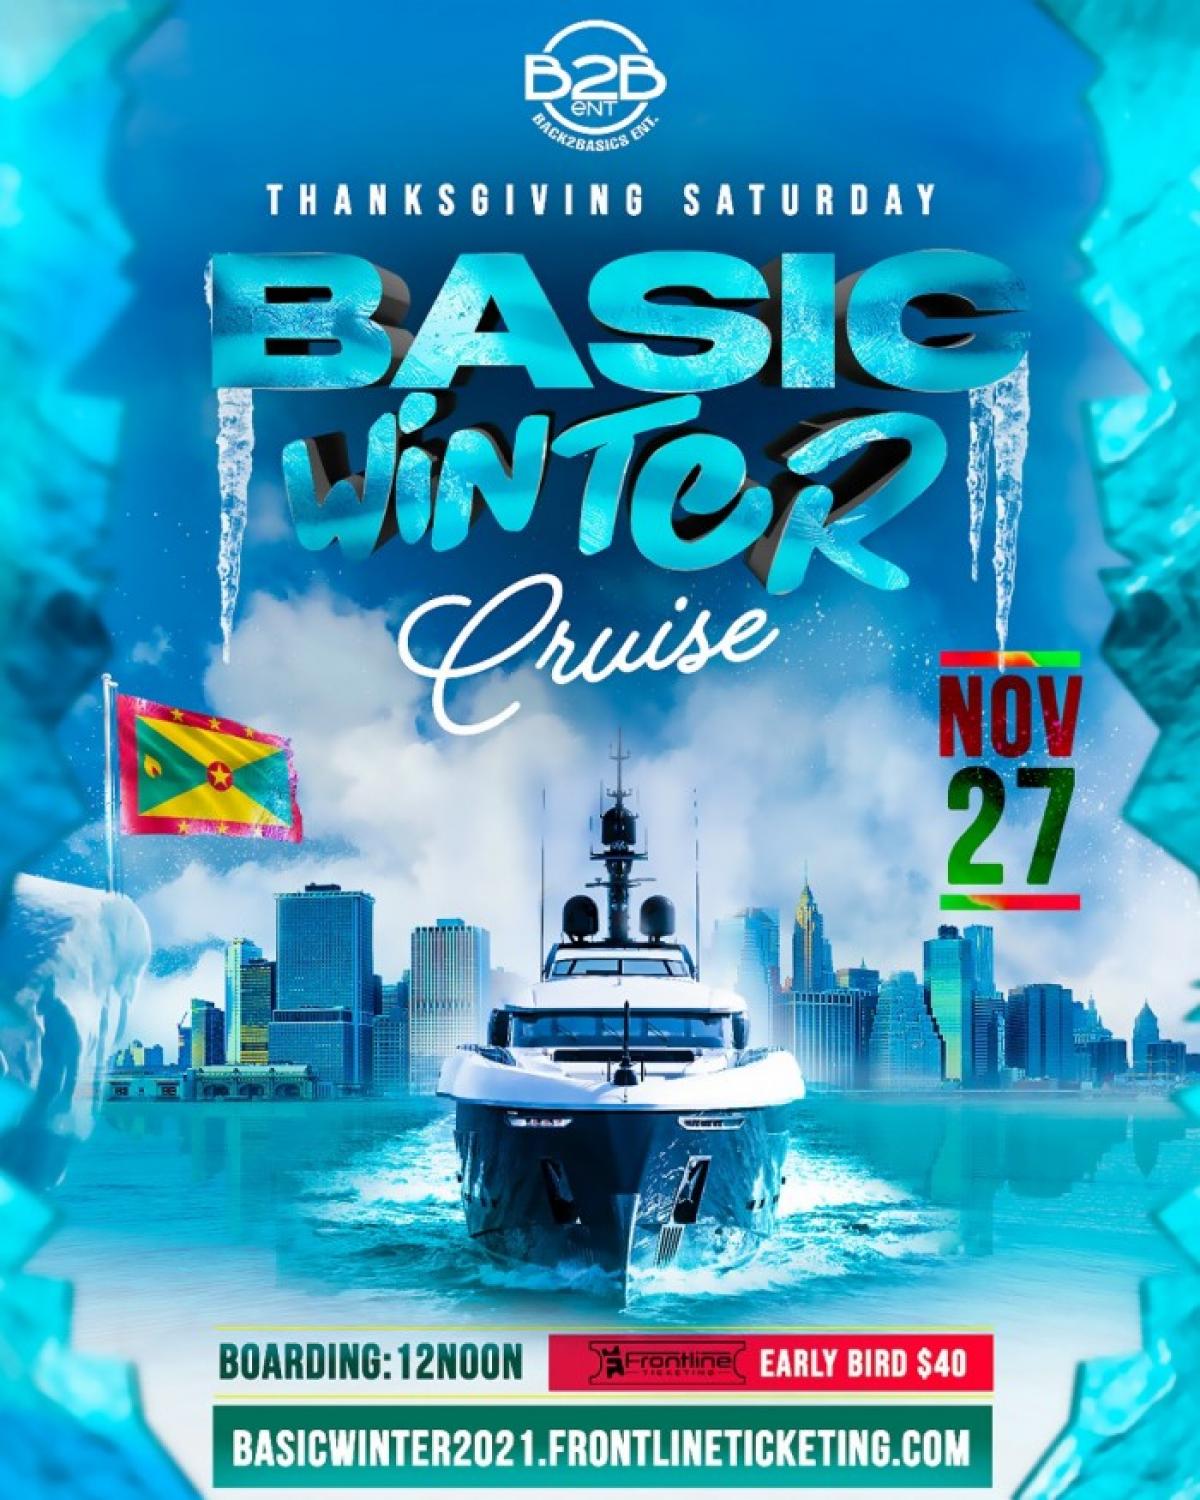 Basic Winter Cruise flyer or graphic.